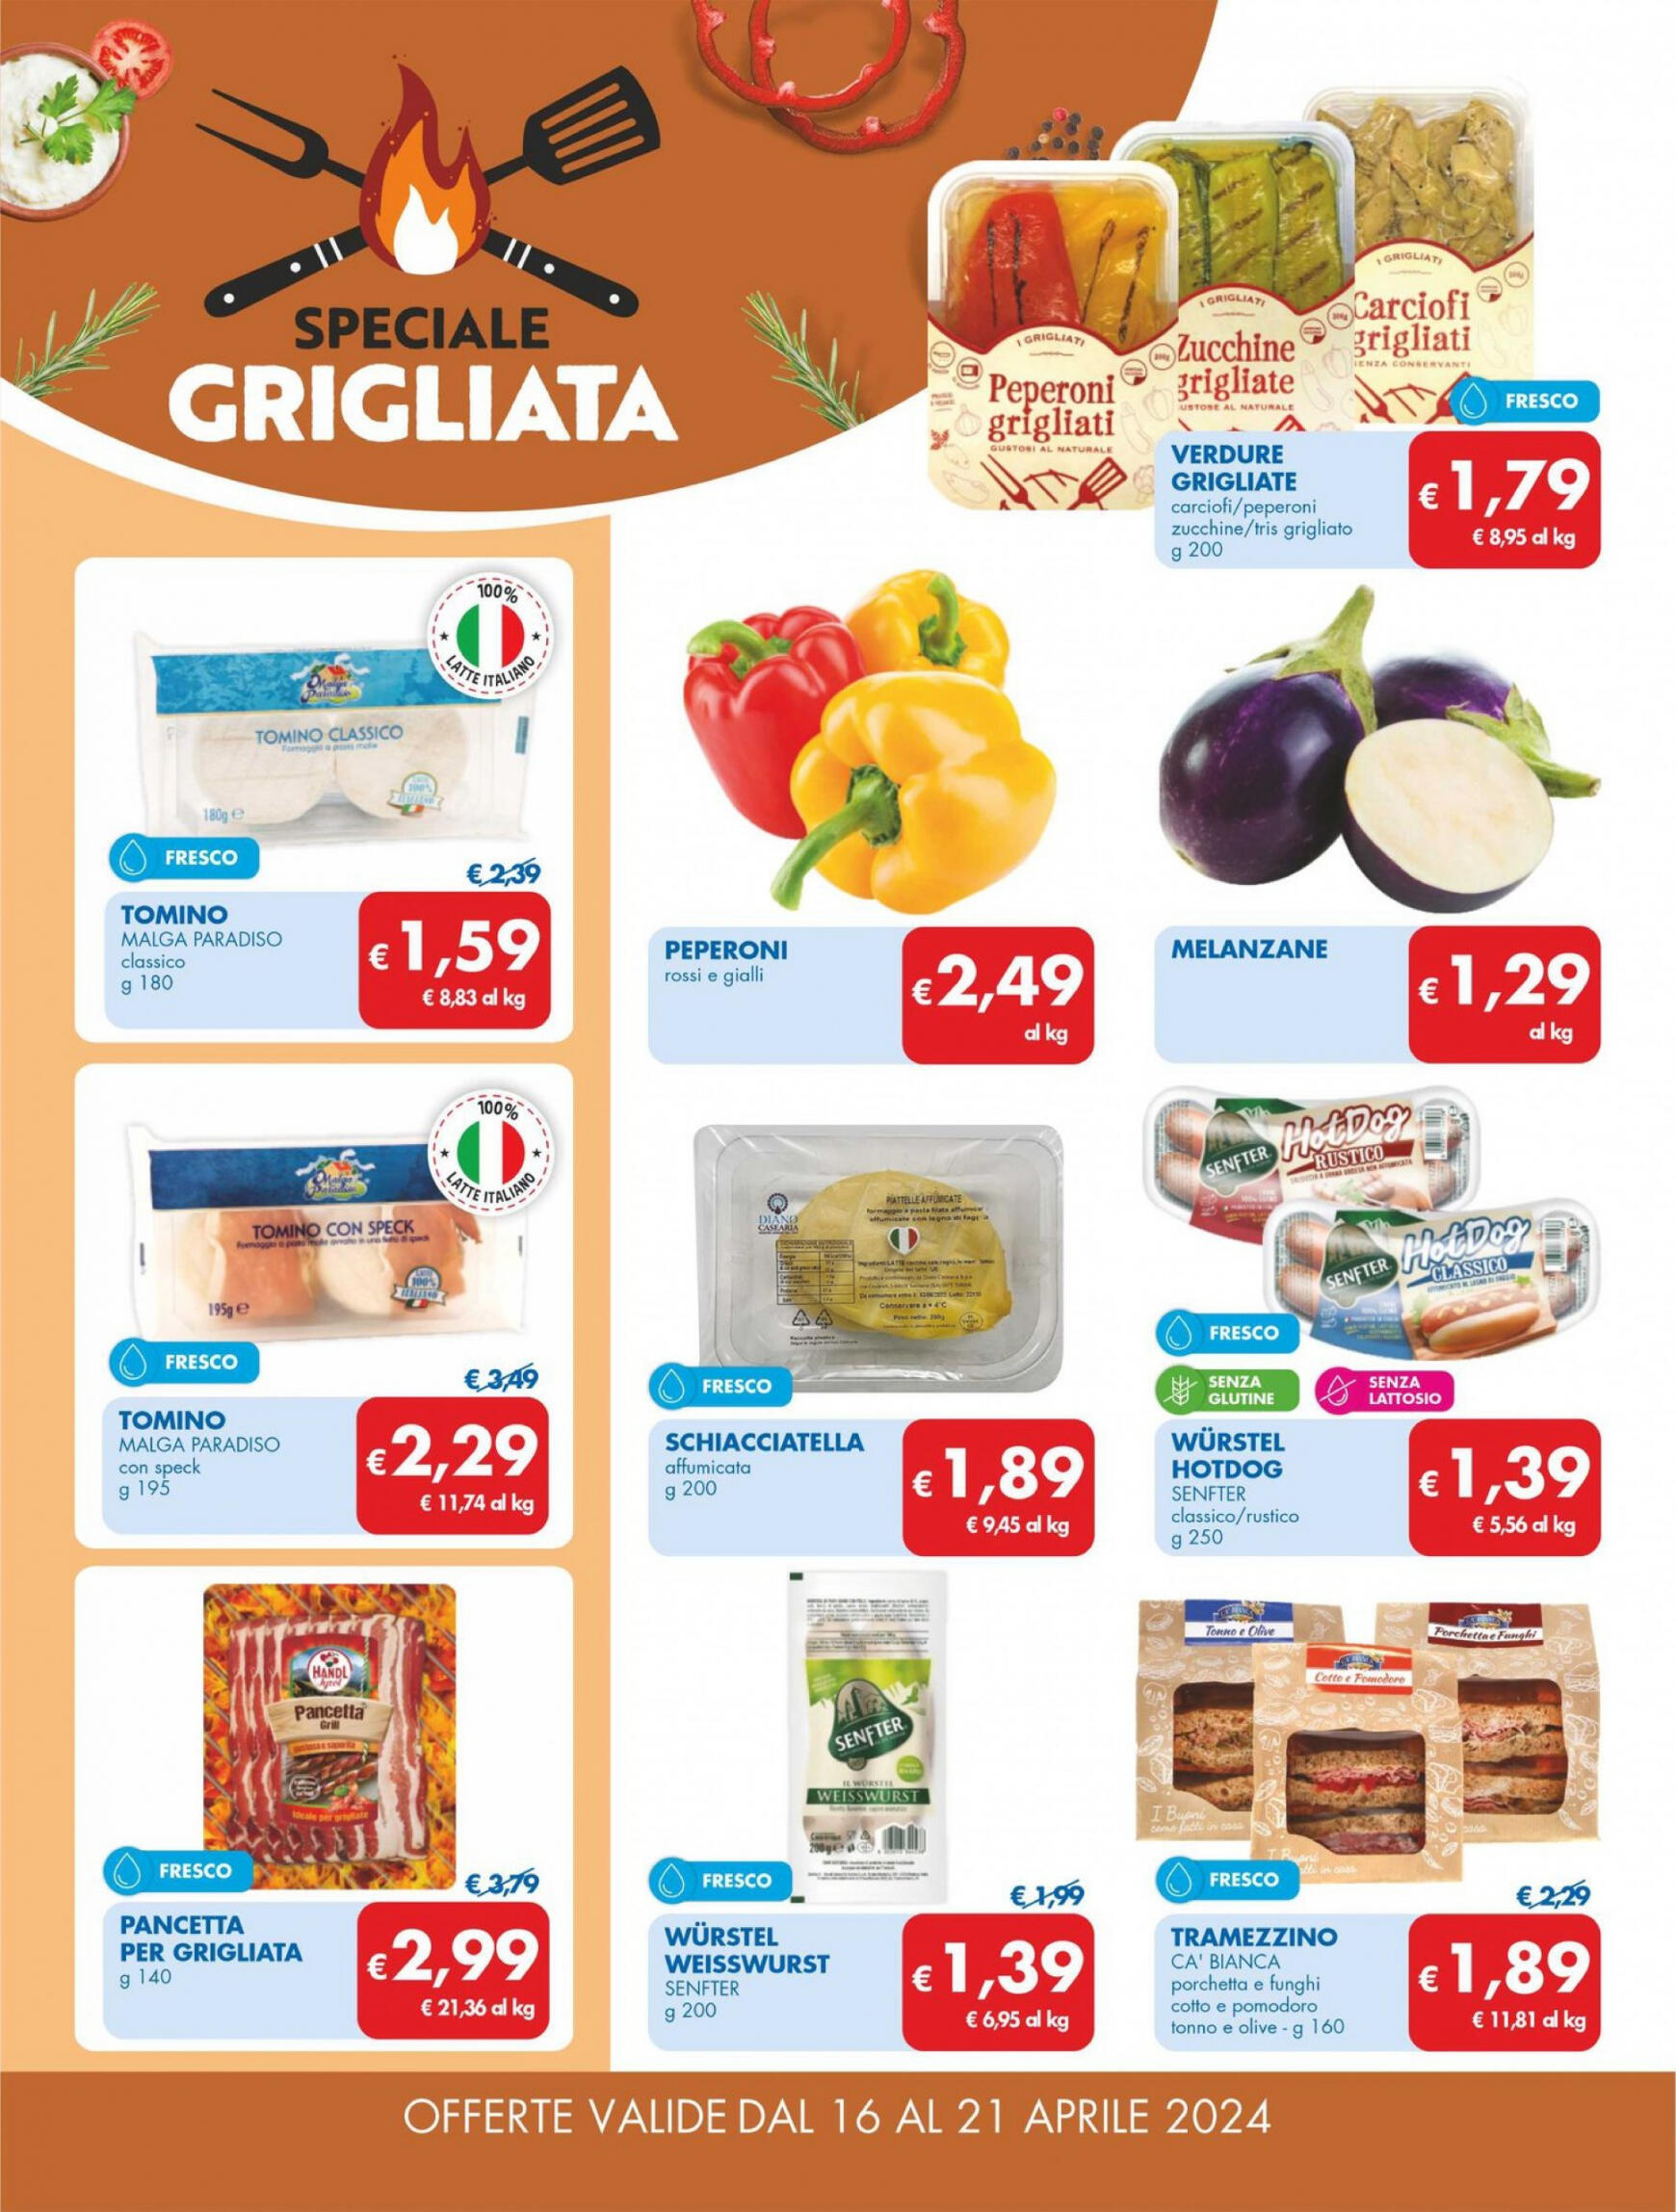 md-discount - Nuovo volantino MD 16.04. - 21.04. - page: 3